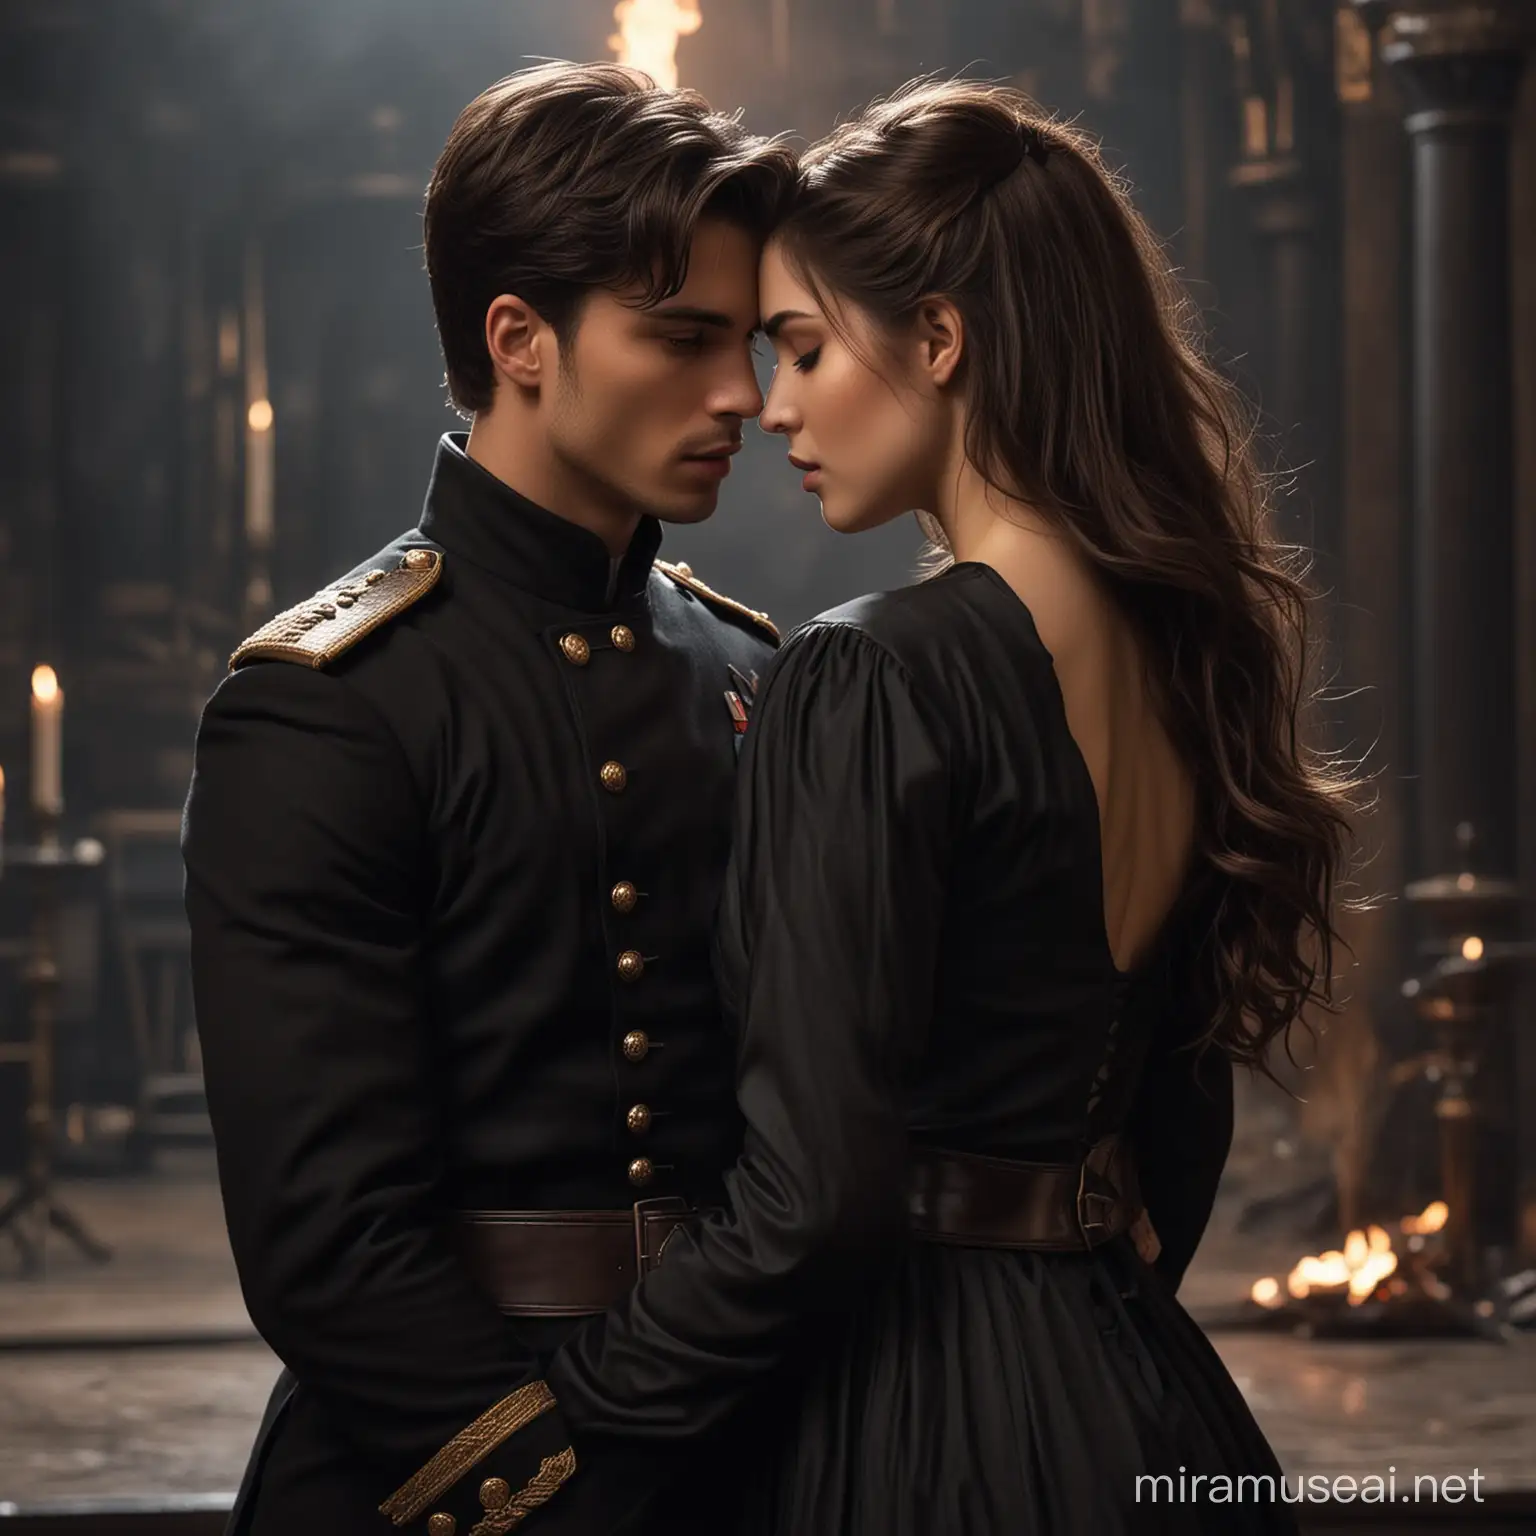 20 year old princess in a dark fantasy novel long brown hair and a black outfit close with a 25 year old prince who has short black hair and a black military like outfit. they are in a dark fire court with soft background lighting with a lot of passion between them